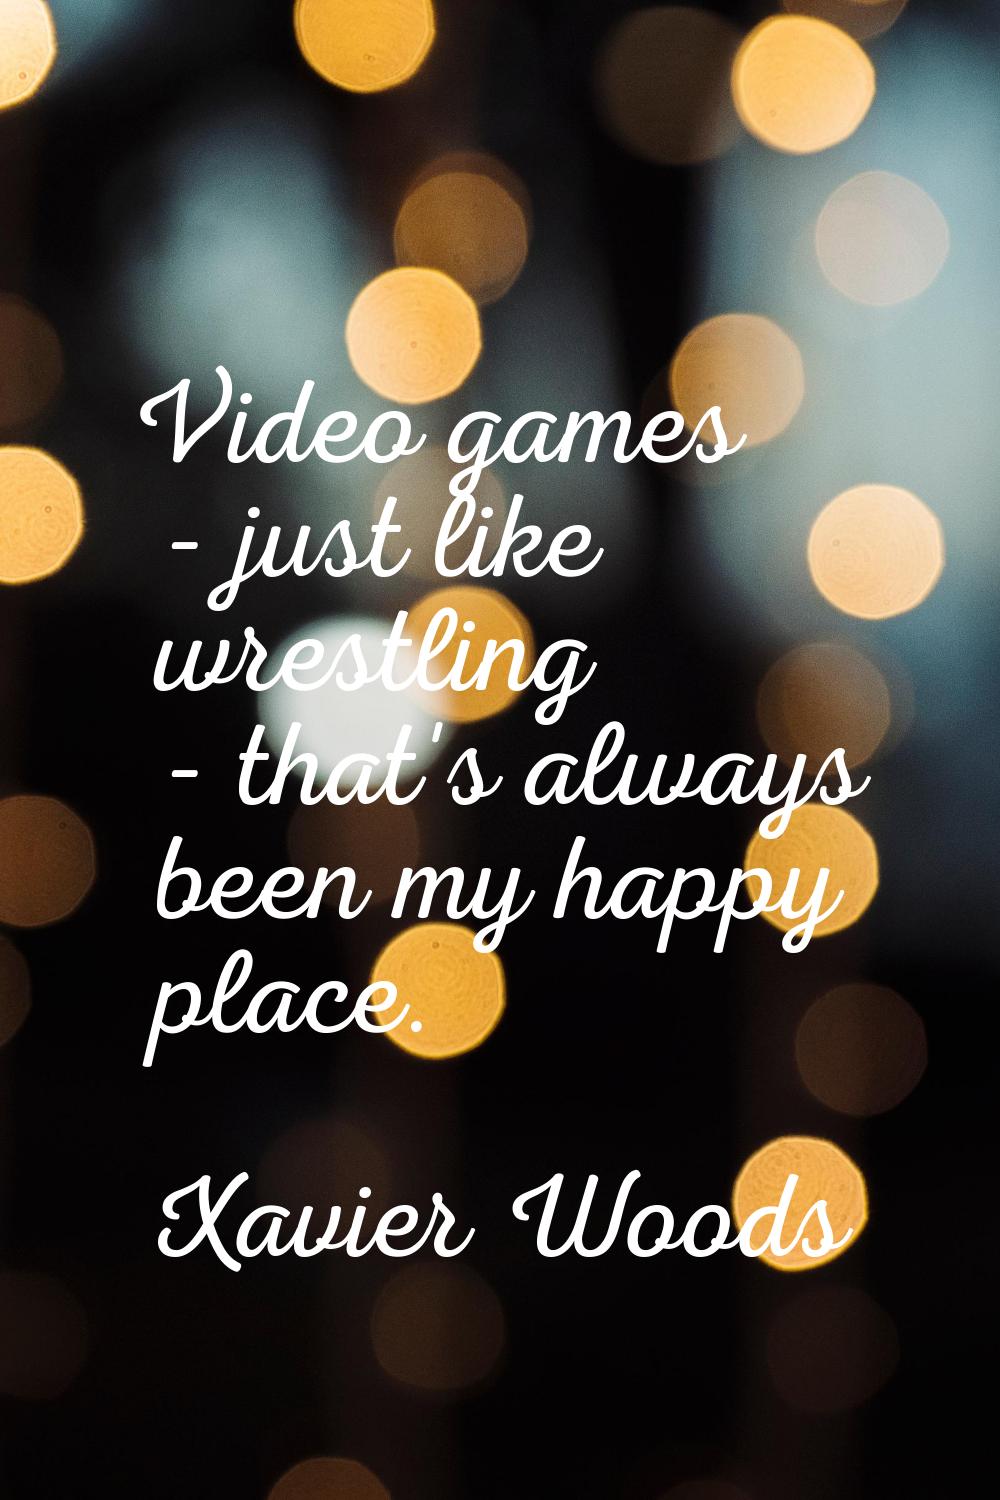 Video games - just like wrestling - that's always been my happy place.